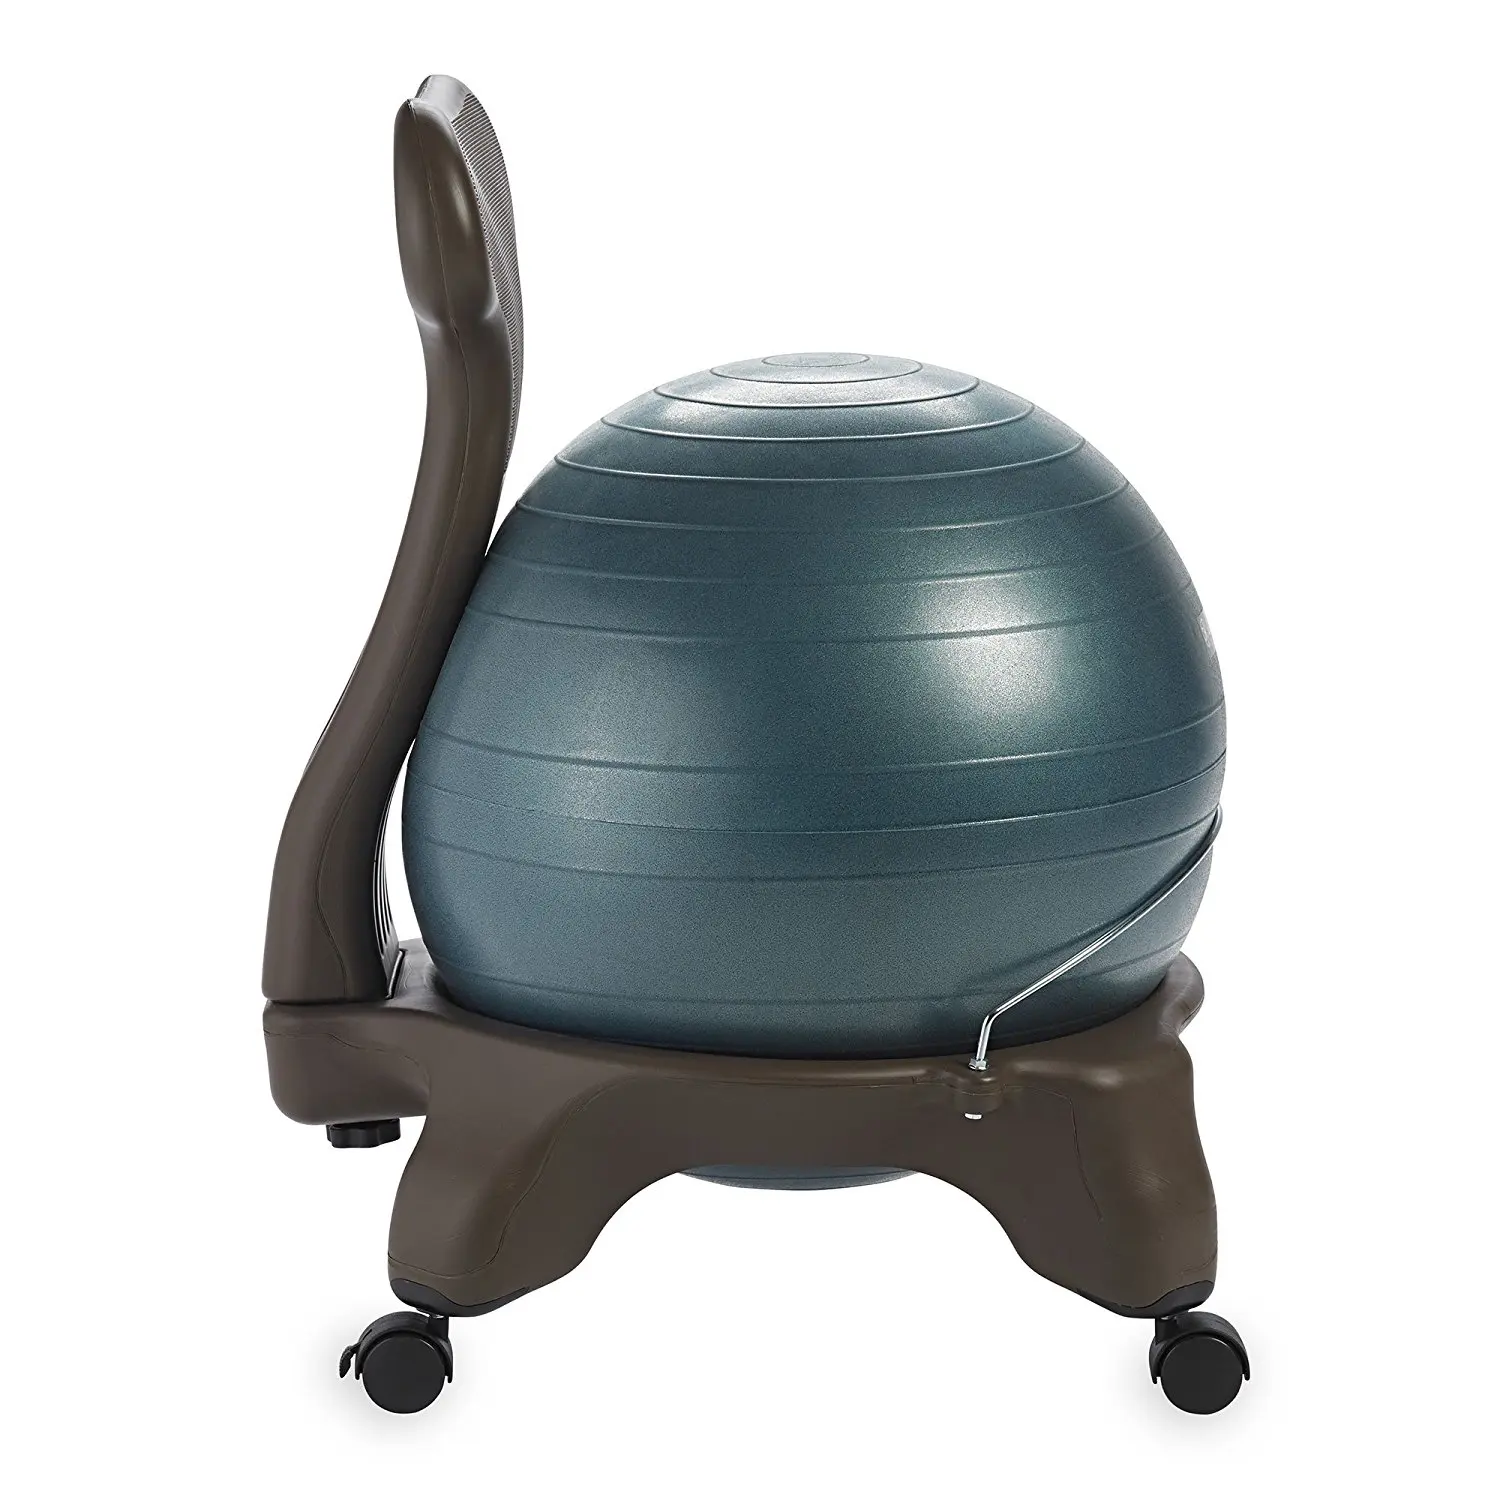 Buy Fitter First Classic Exercise Ball Chair 65 cm QTY: 1 in Cheap